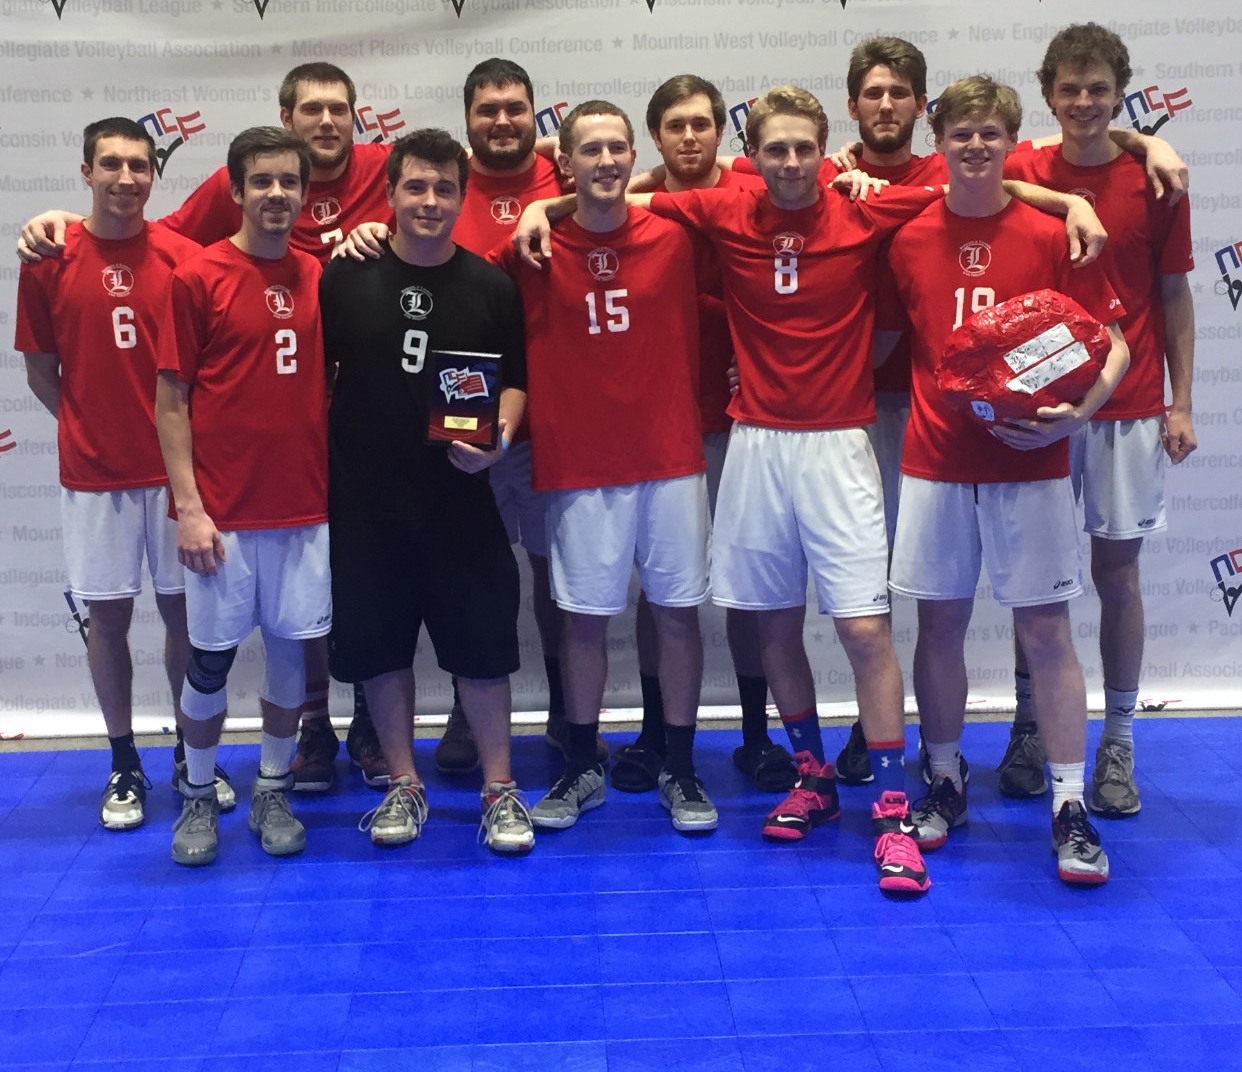 The UofL men's volleyball team followed its 2015-16 inaugural campaign with a third place finish at nationals this year.